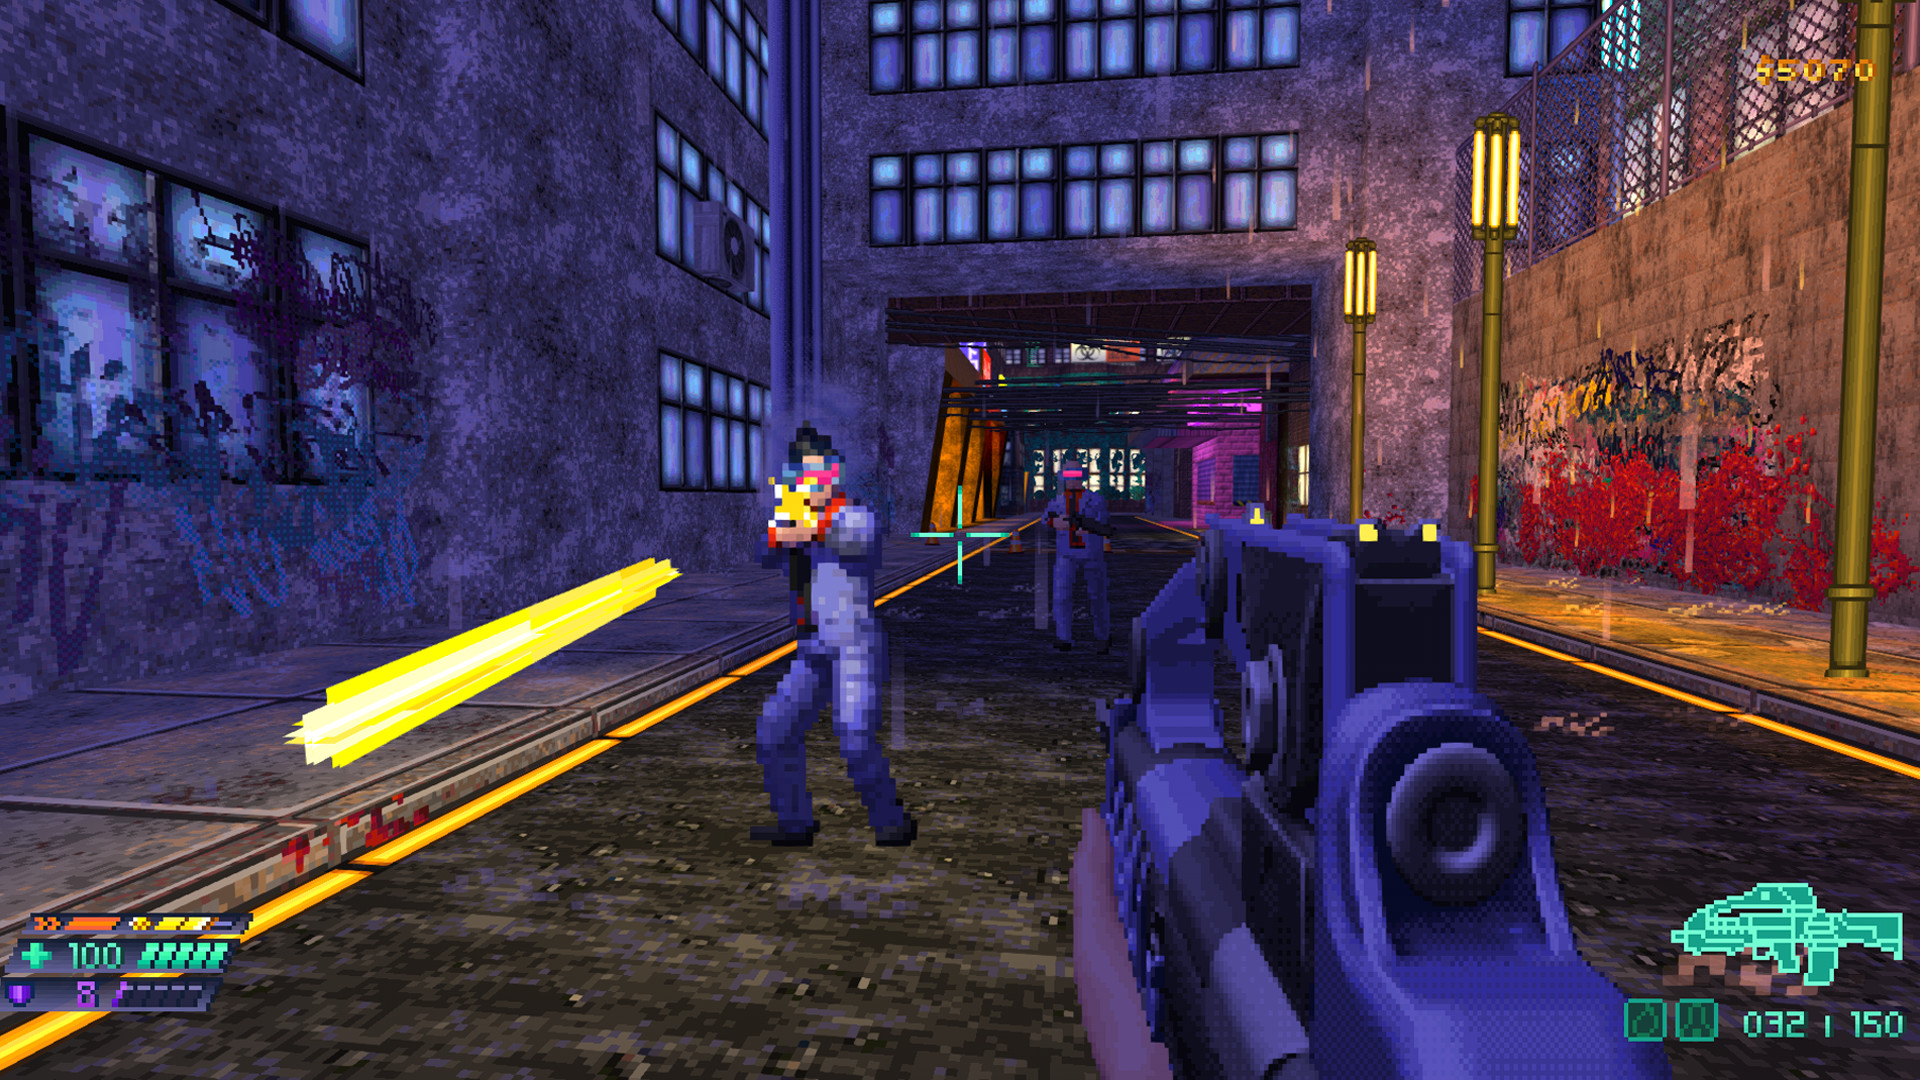  Retro FPS Beyond Sunset is a precision-crafted cyberpunk potpourri of all the great megawads that came before it 